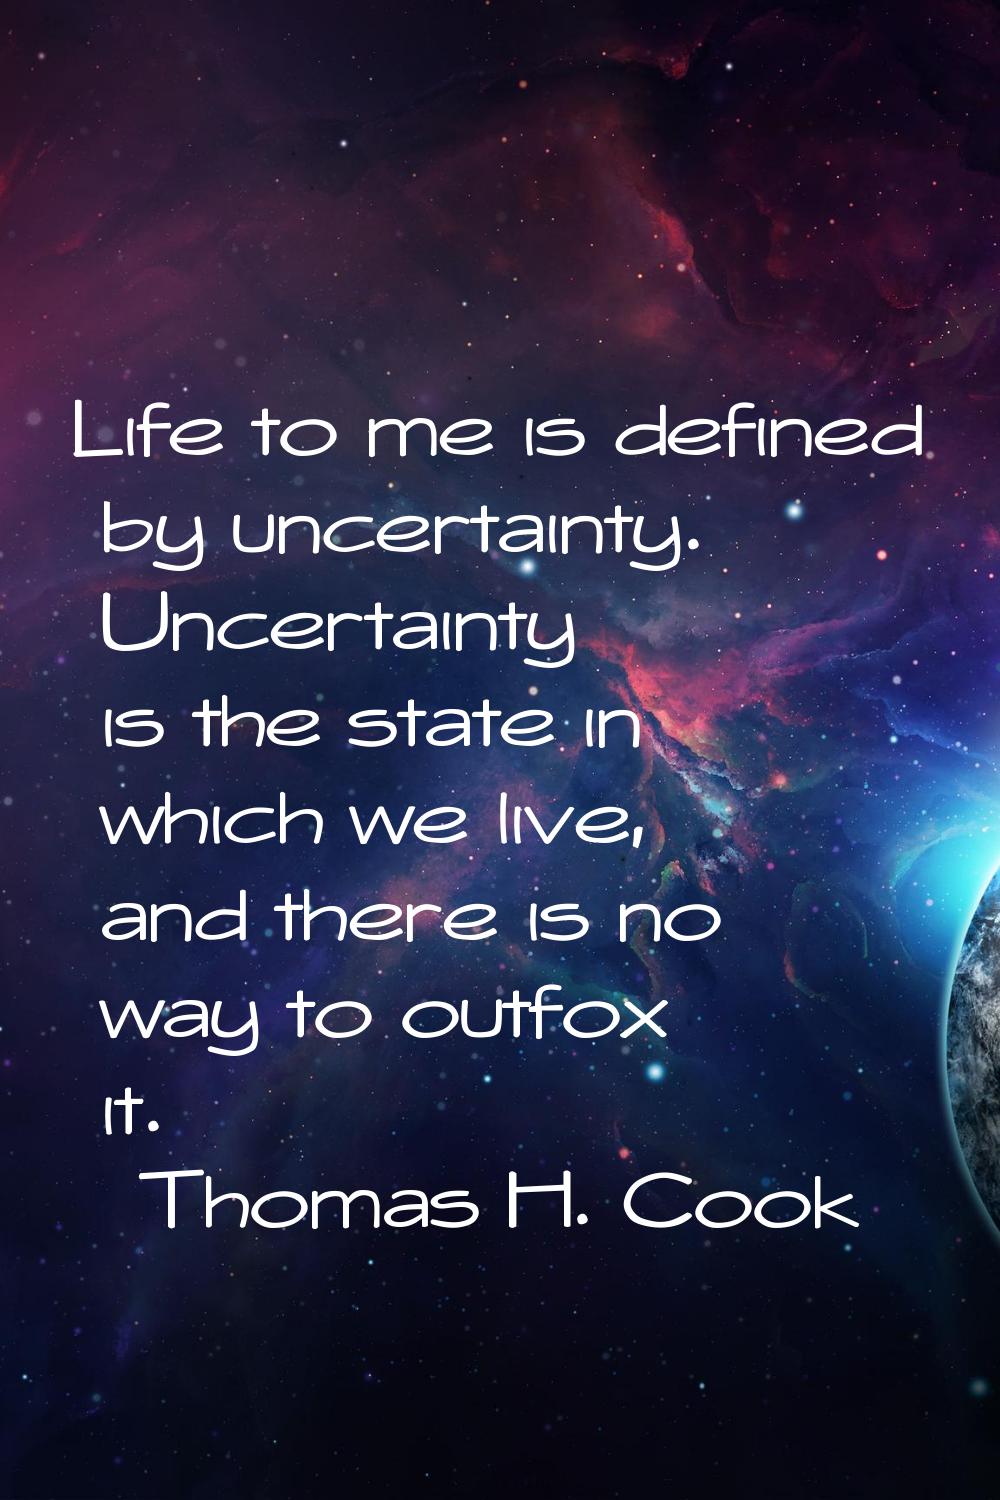 Life to me is defined by uncertainty. Uncertainty is the state in which we live, and there is no wa